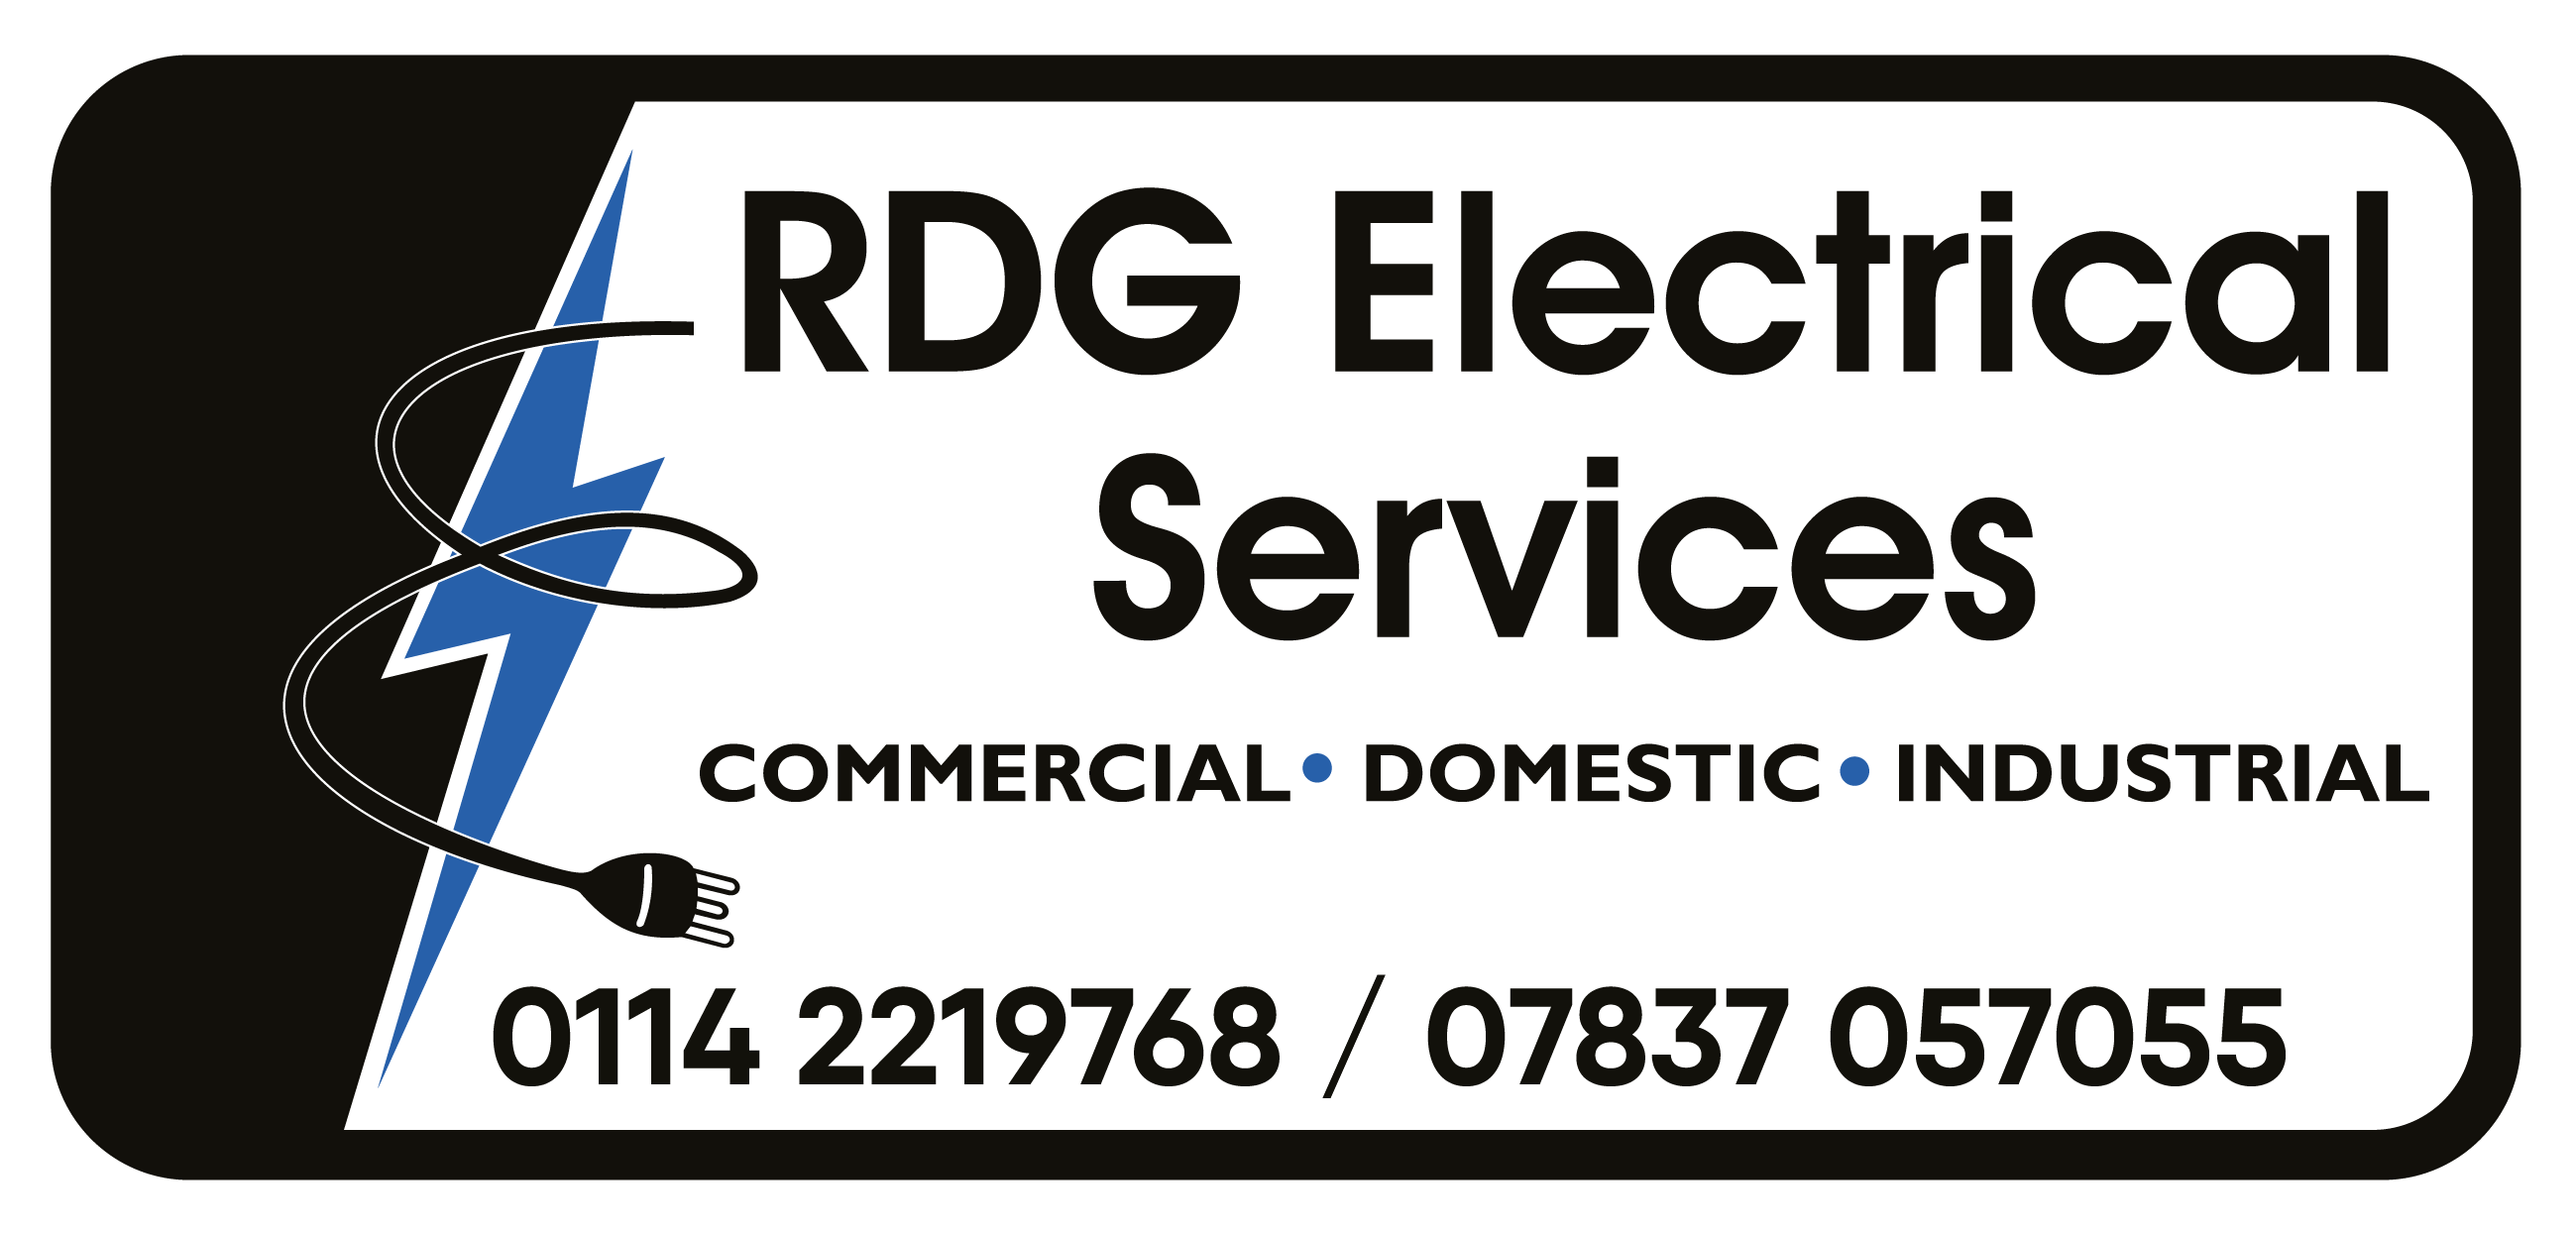 RDG Electrical Services – Rotherham Electrician